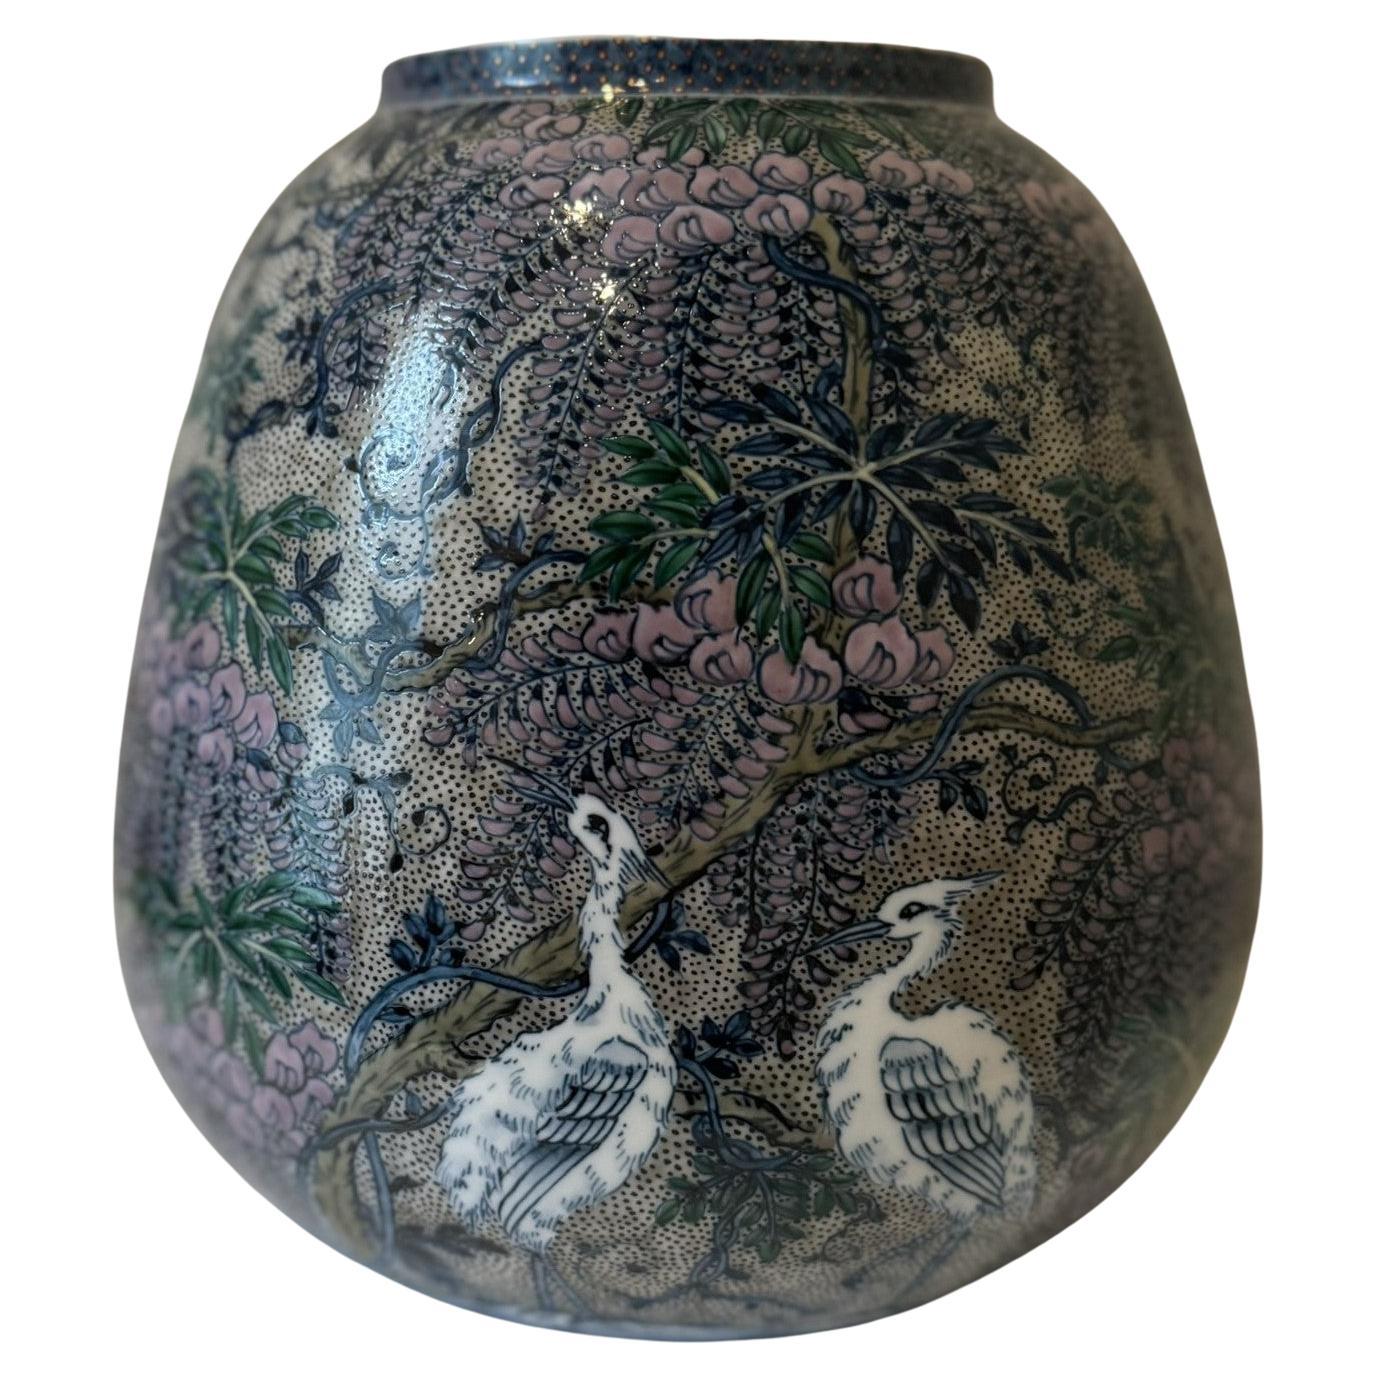 Extraordinary Japanese contemporary decorative porcelain vase, extremely intricately hand-painted in pink, blue and green on a stunningly shaped porcelain body, a signed masterpiece by master porcelain artist of the Imari-Arita region of Japan. This